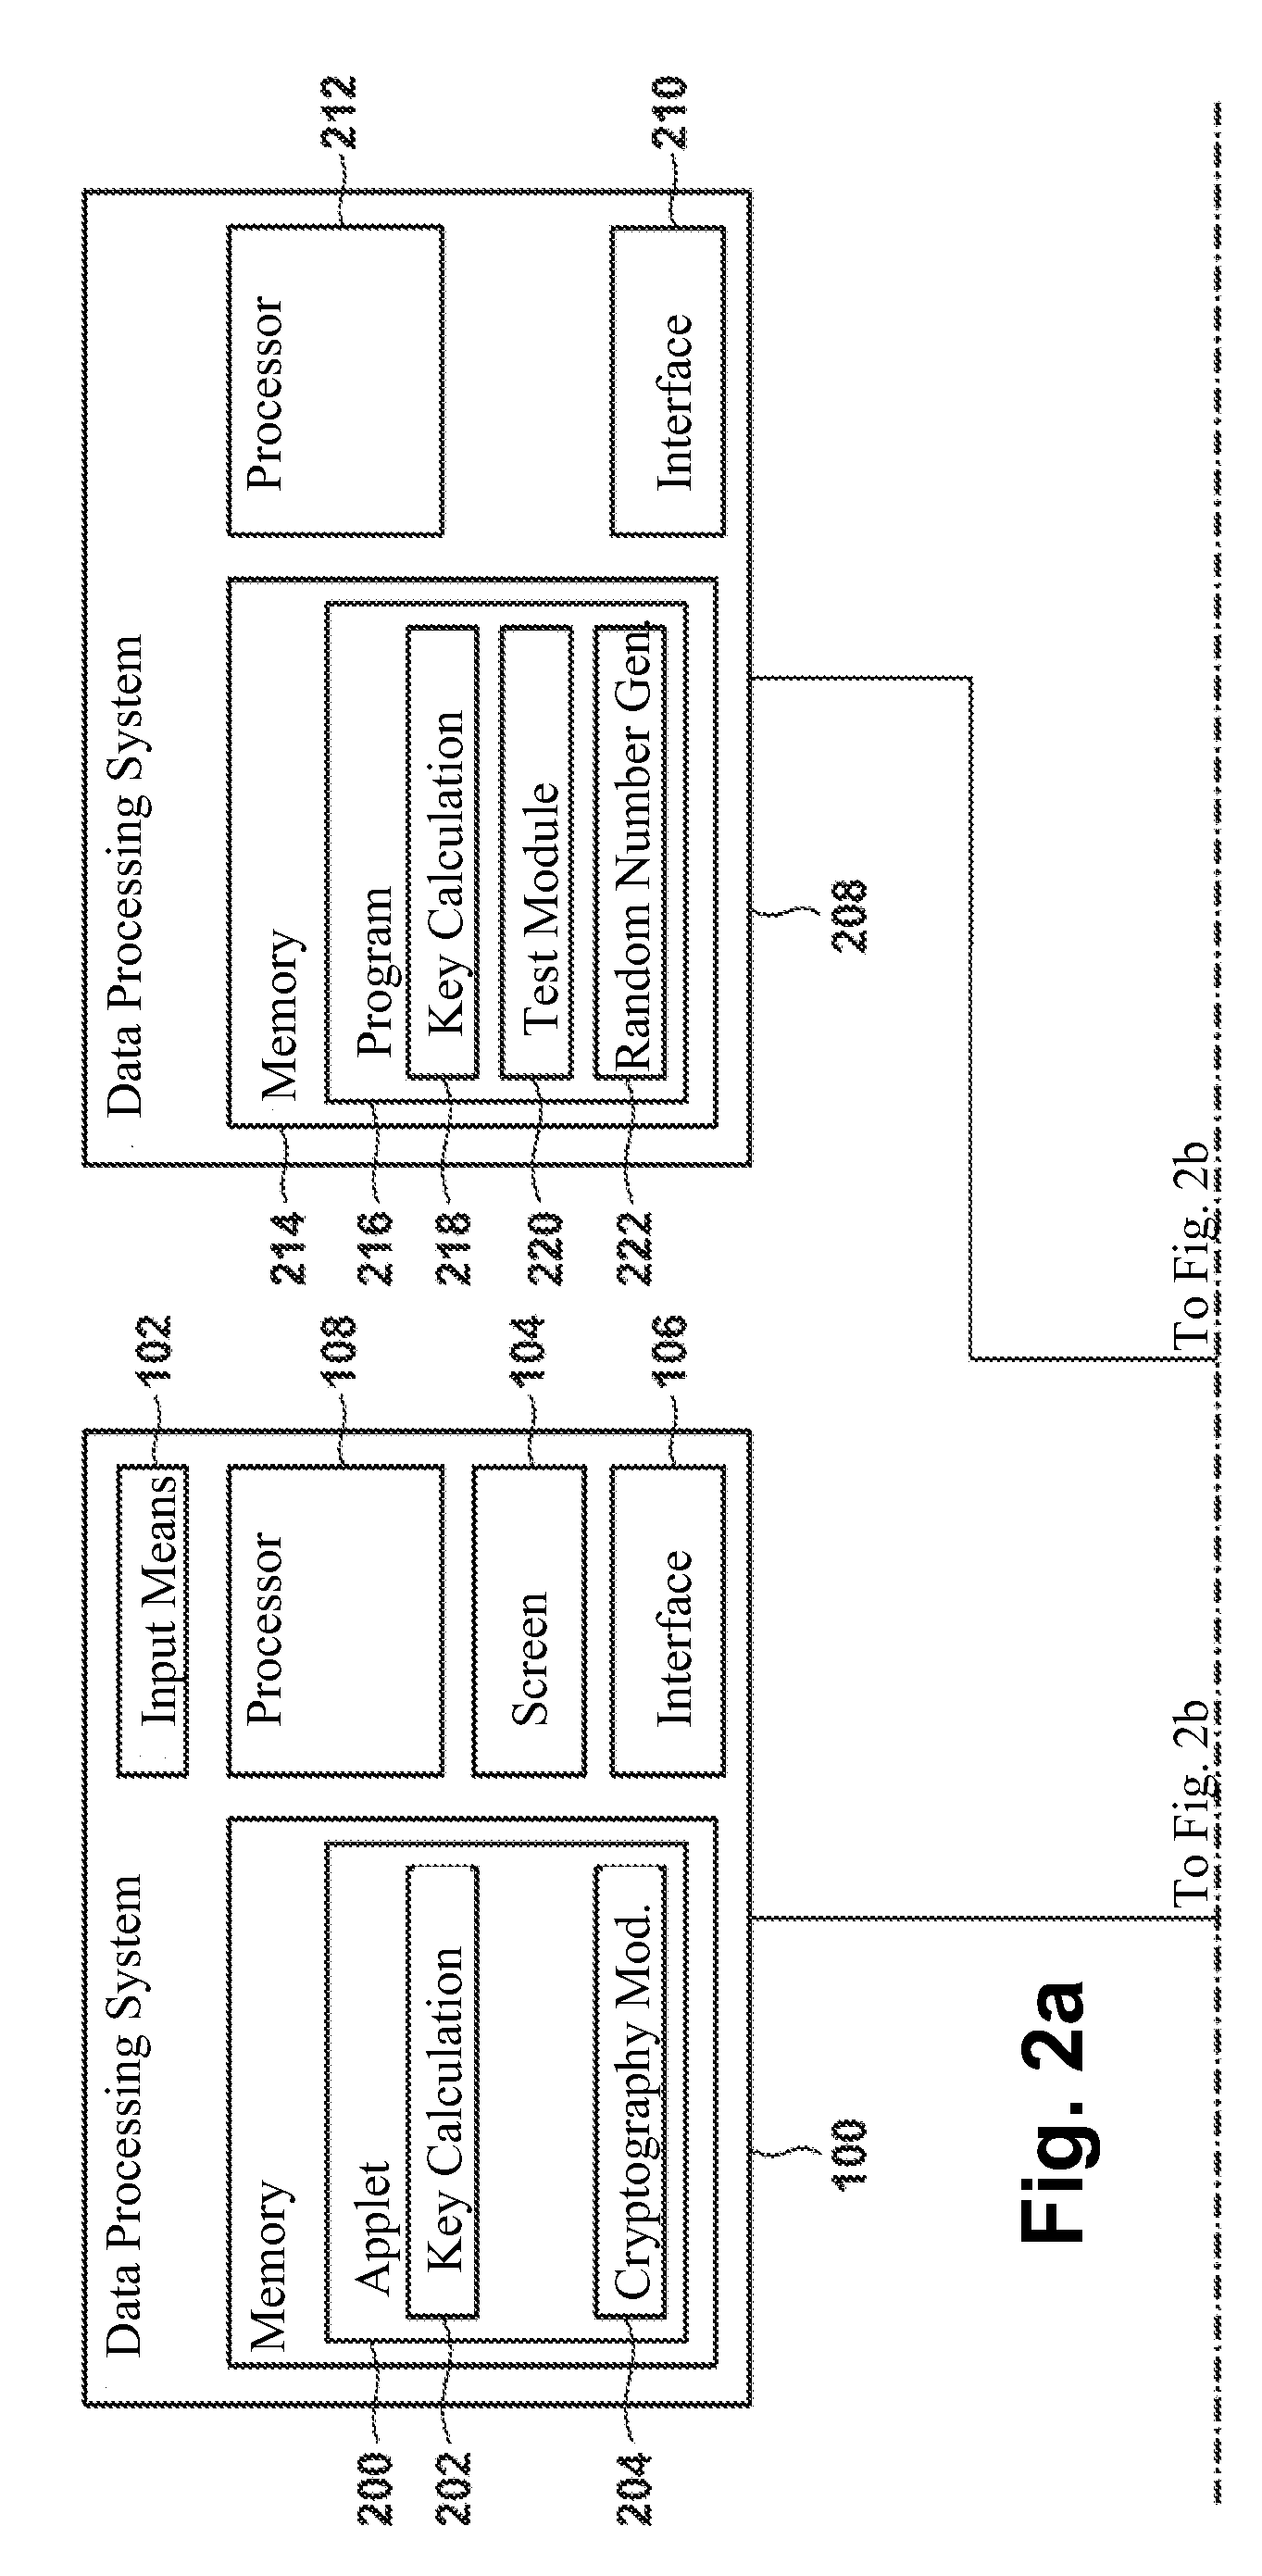 Method for generating an asymmetric cryptographic key pair and its application